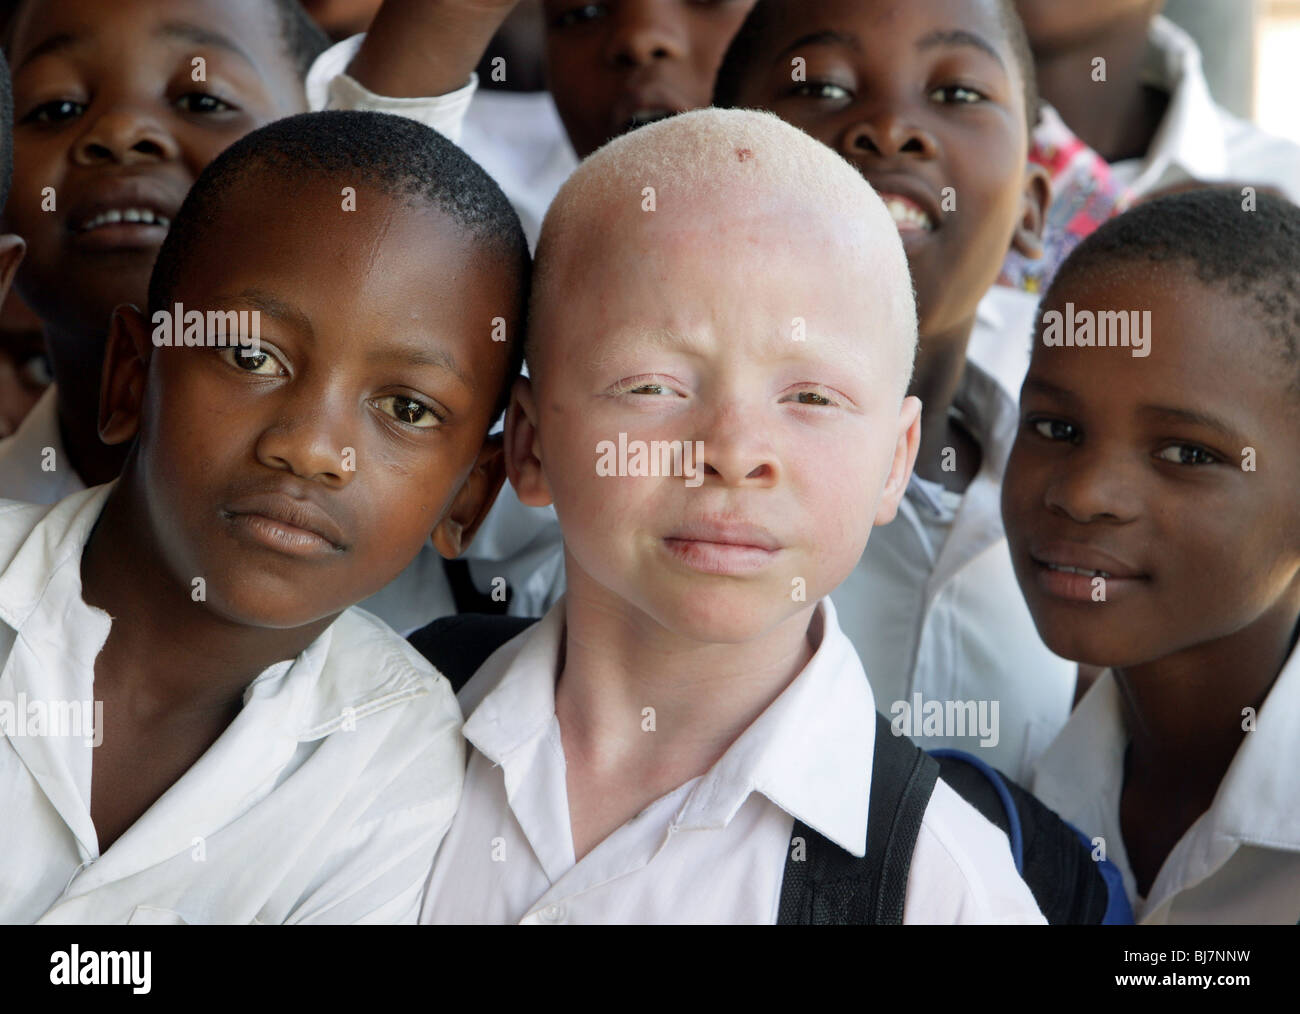 South Africa - Albino boy with black pupils in a school in Mariannhill. In Africa, prosecution of albinos is not uncommon. Stock Photo